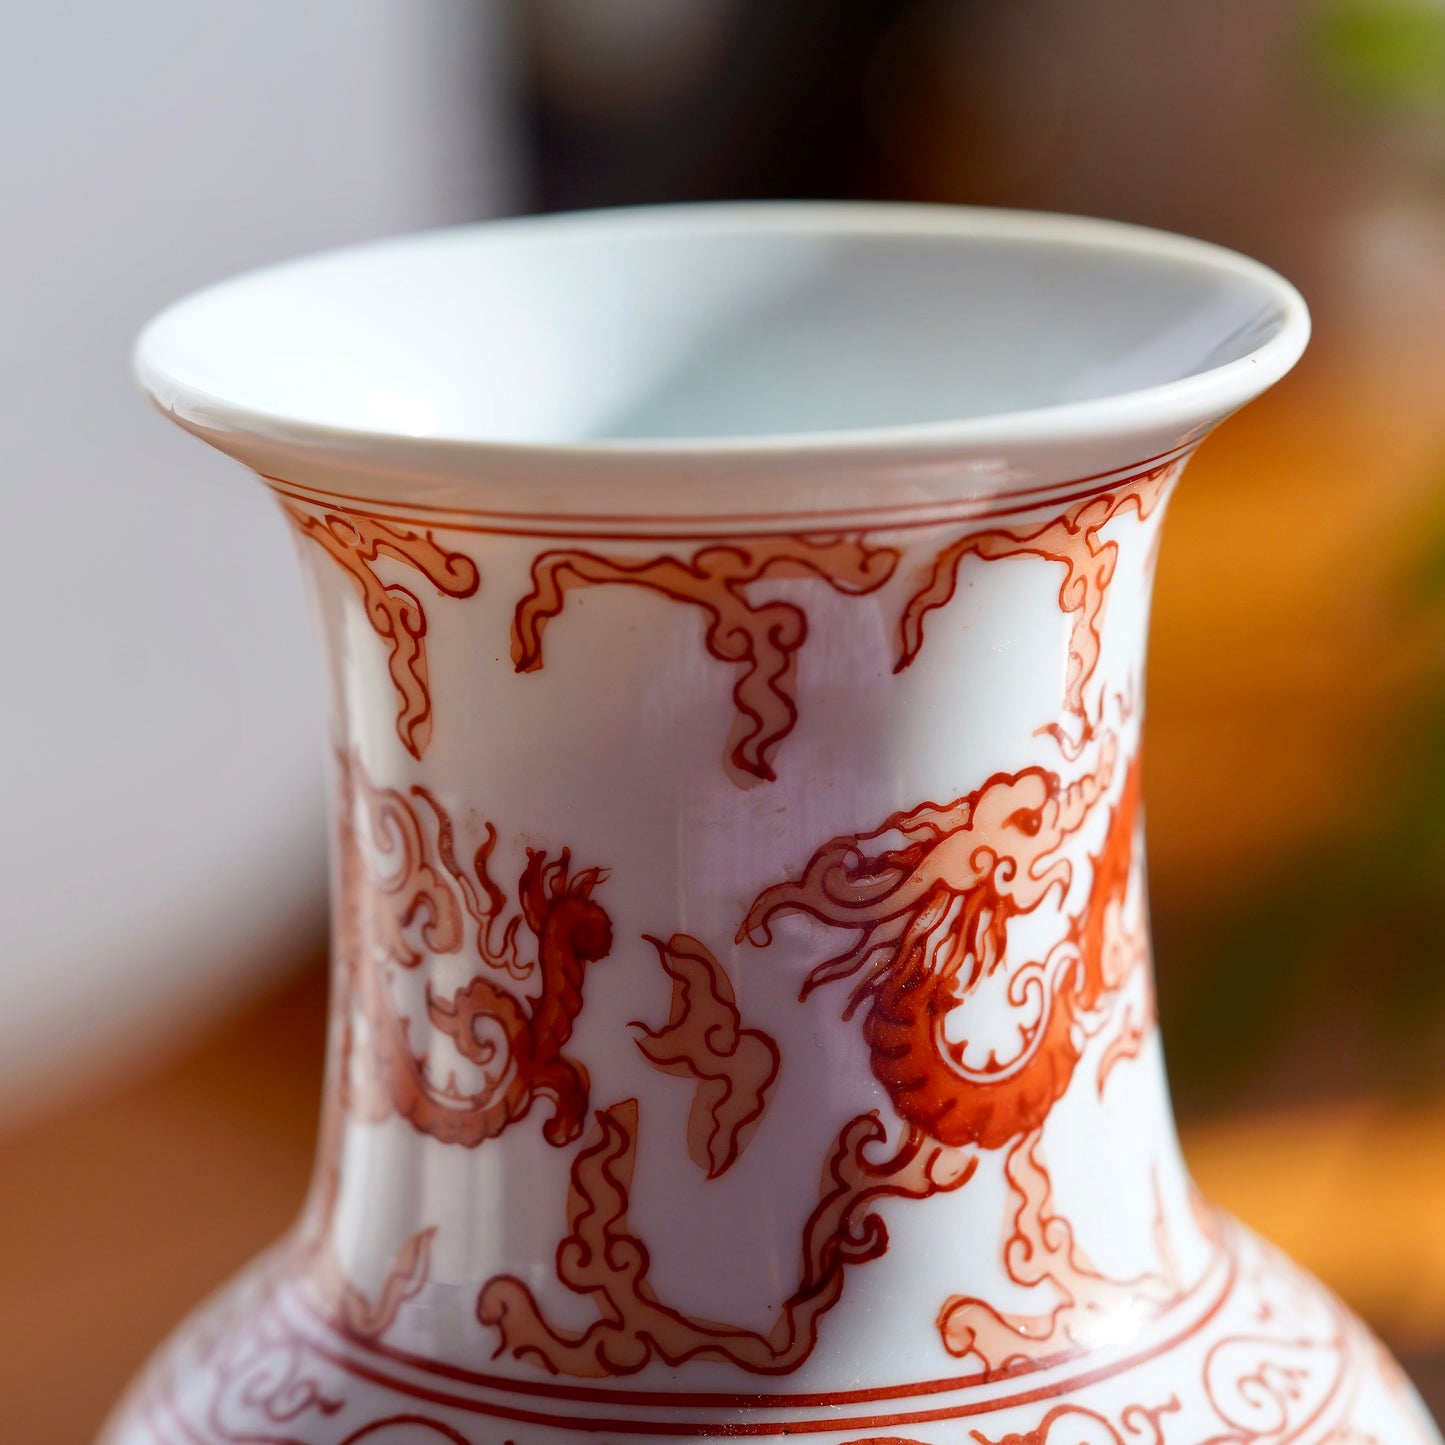 Macro photo of stem and rim of opening on vintage orange and white hand painted Japanese porcelain vase with dragons